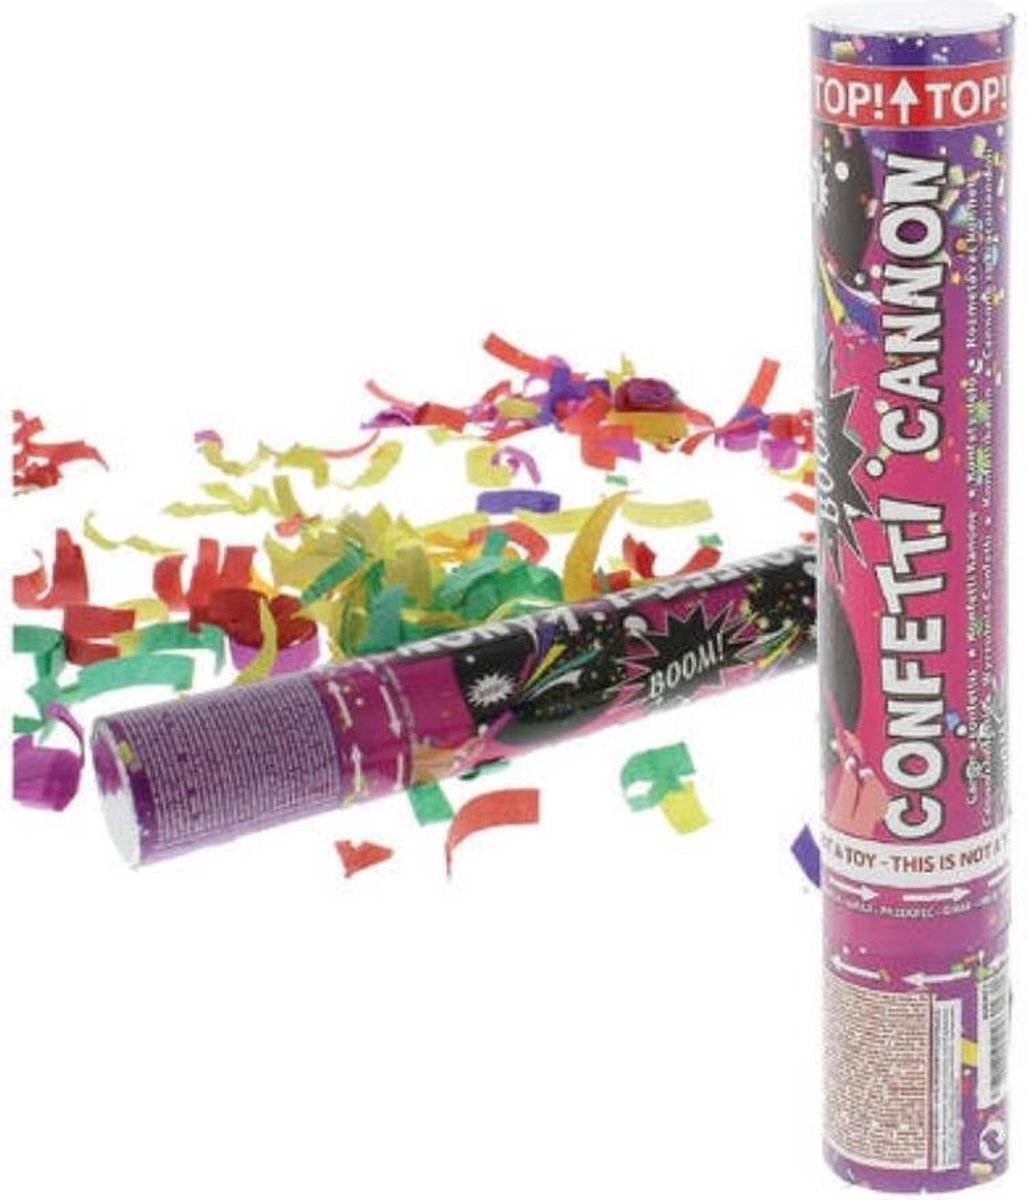 3 STUKS Party Confetti Shooters - Partyshooter - Partyshooter - Feest Shooter - Professionele Party Popper - Confetti Kanon - Merkloos